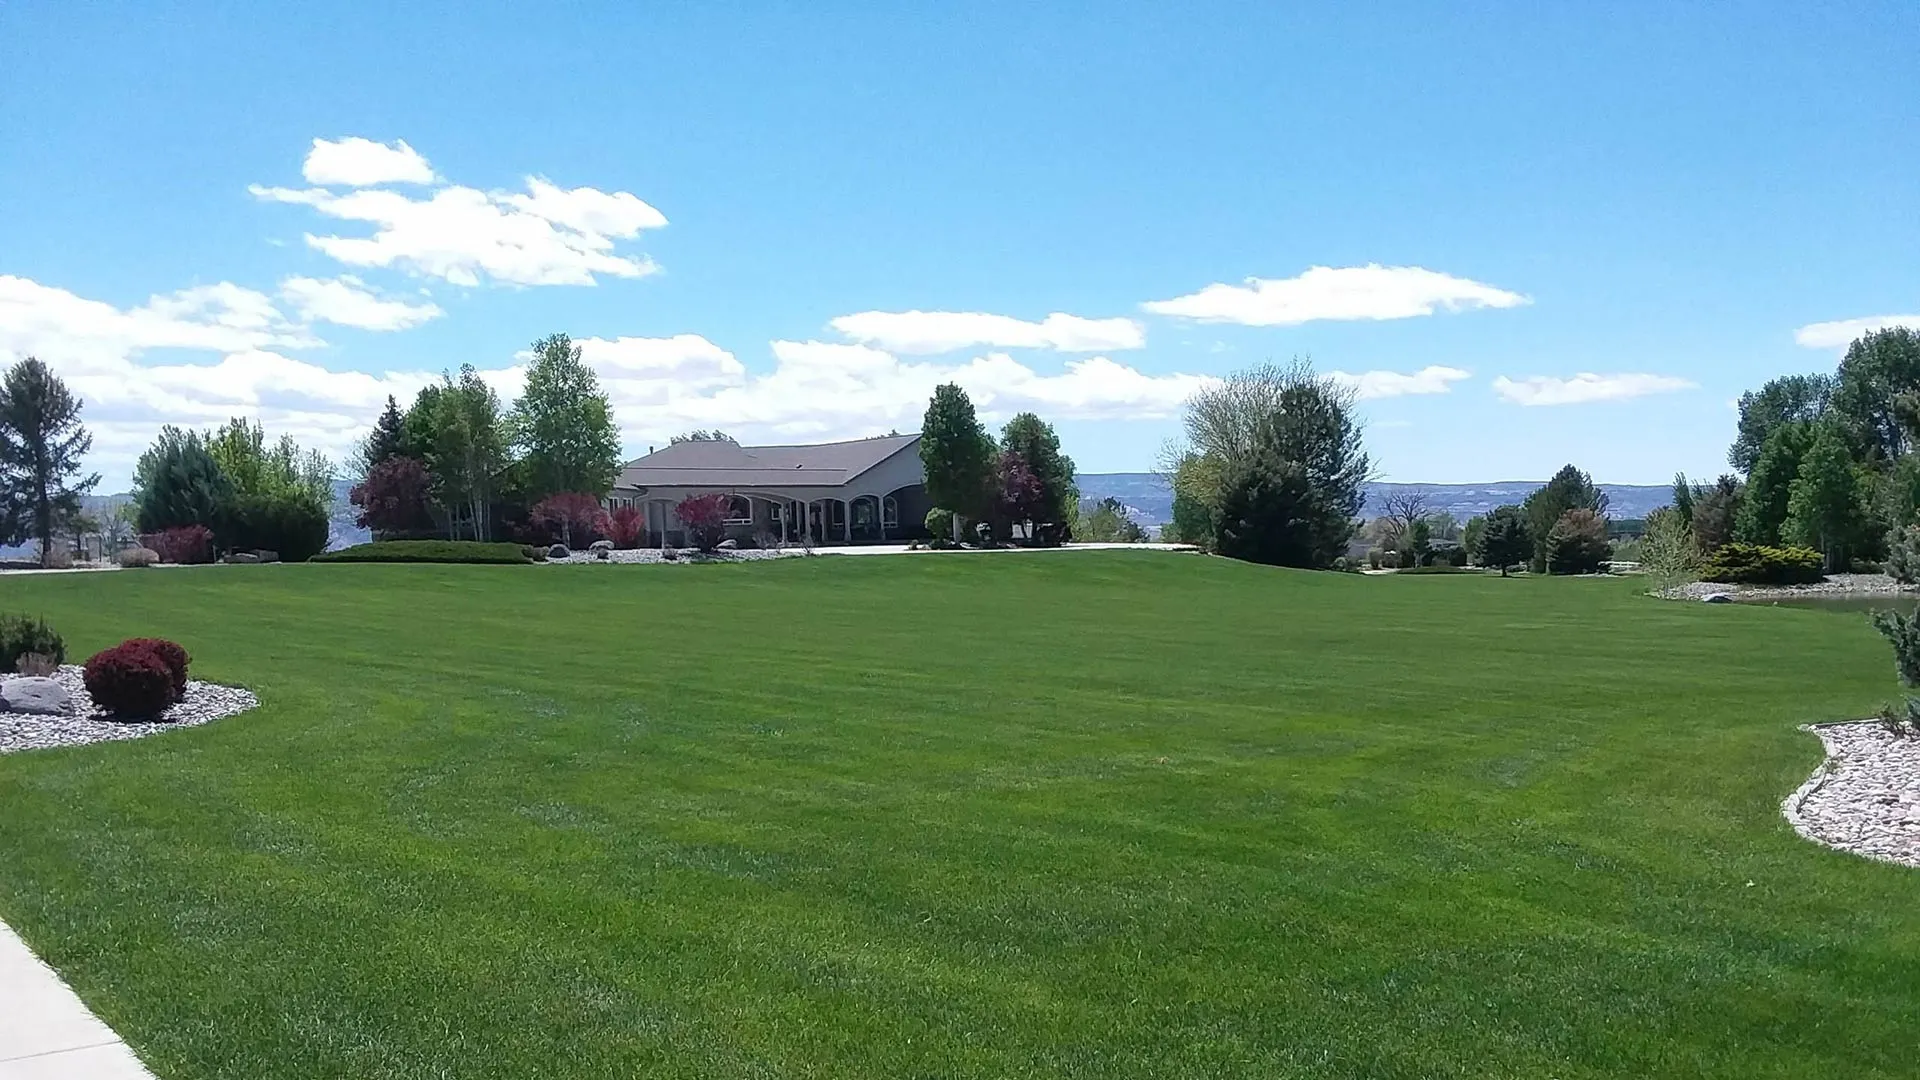 A healthy, beautiful lawn with a lovely home in the background in the Grand Junction Area.